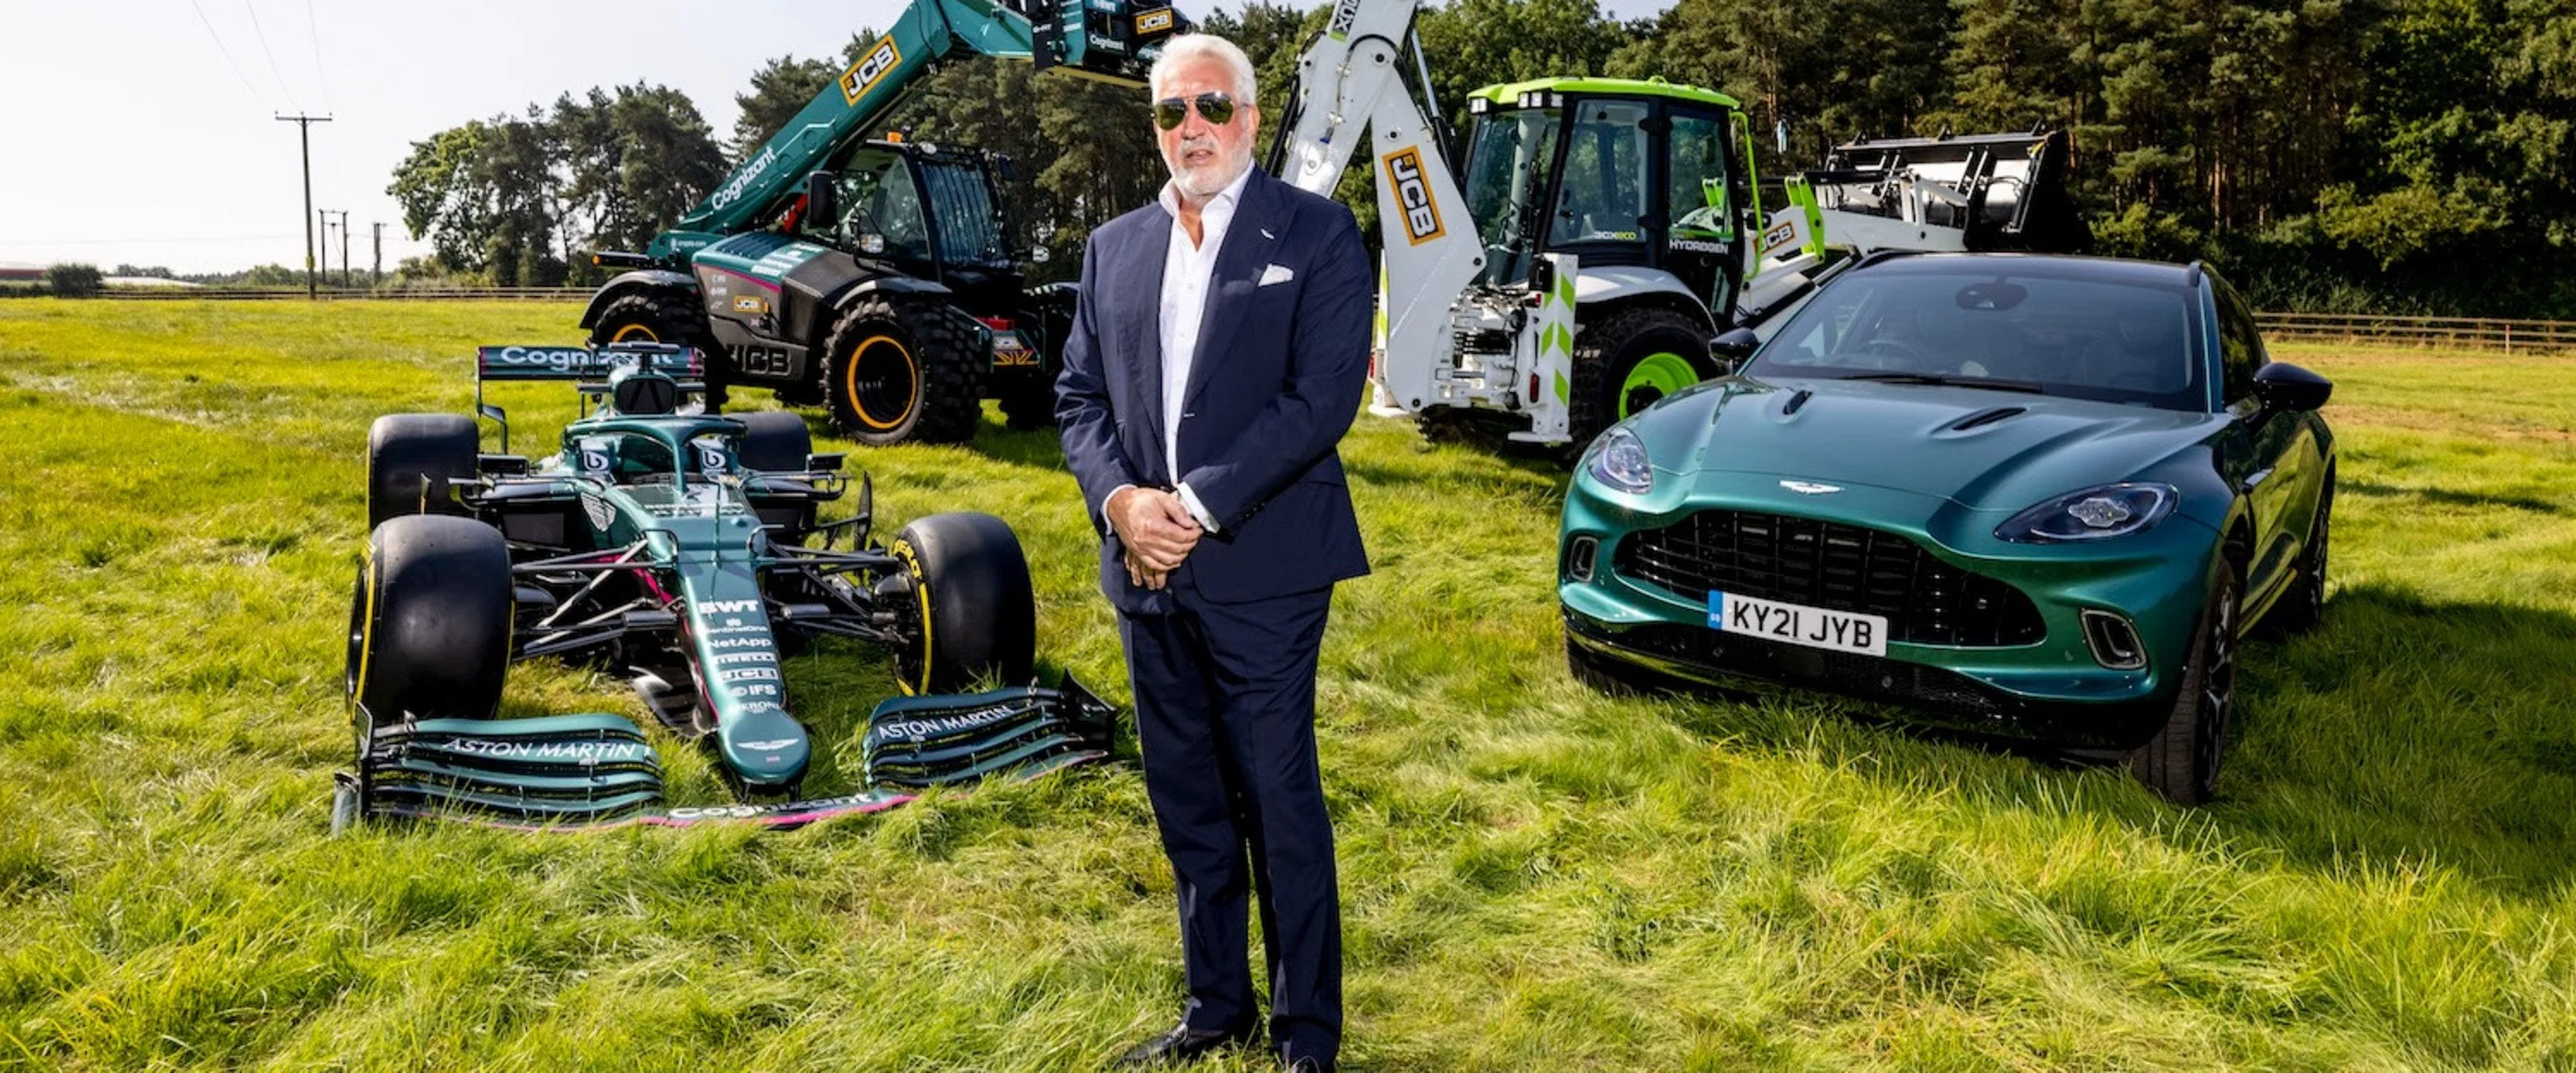 Business F1 Top 20 Petrolheads: Lawrence Stroll, The Ultimate Petrolhead image